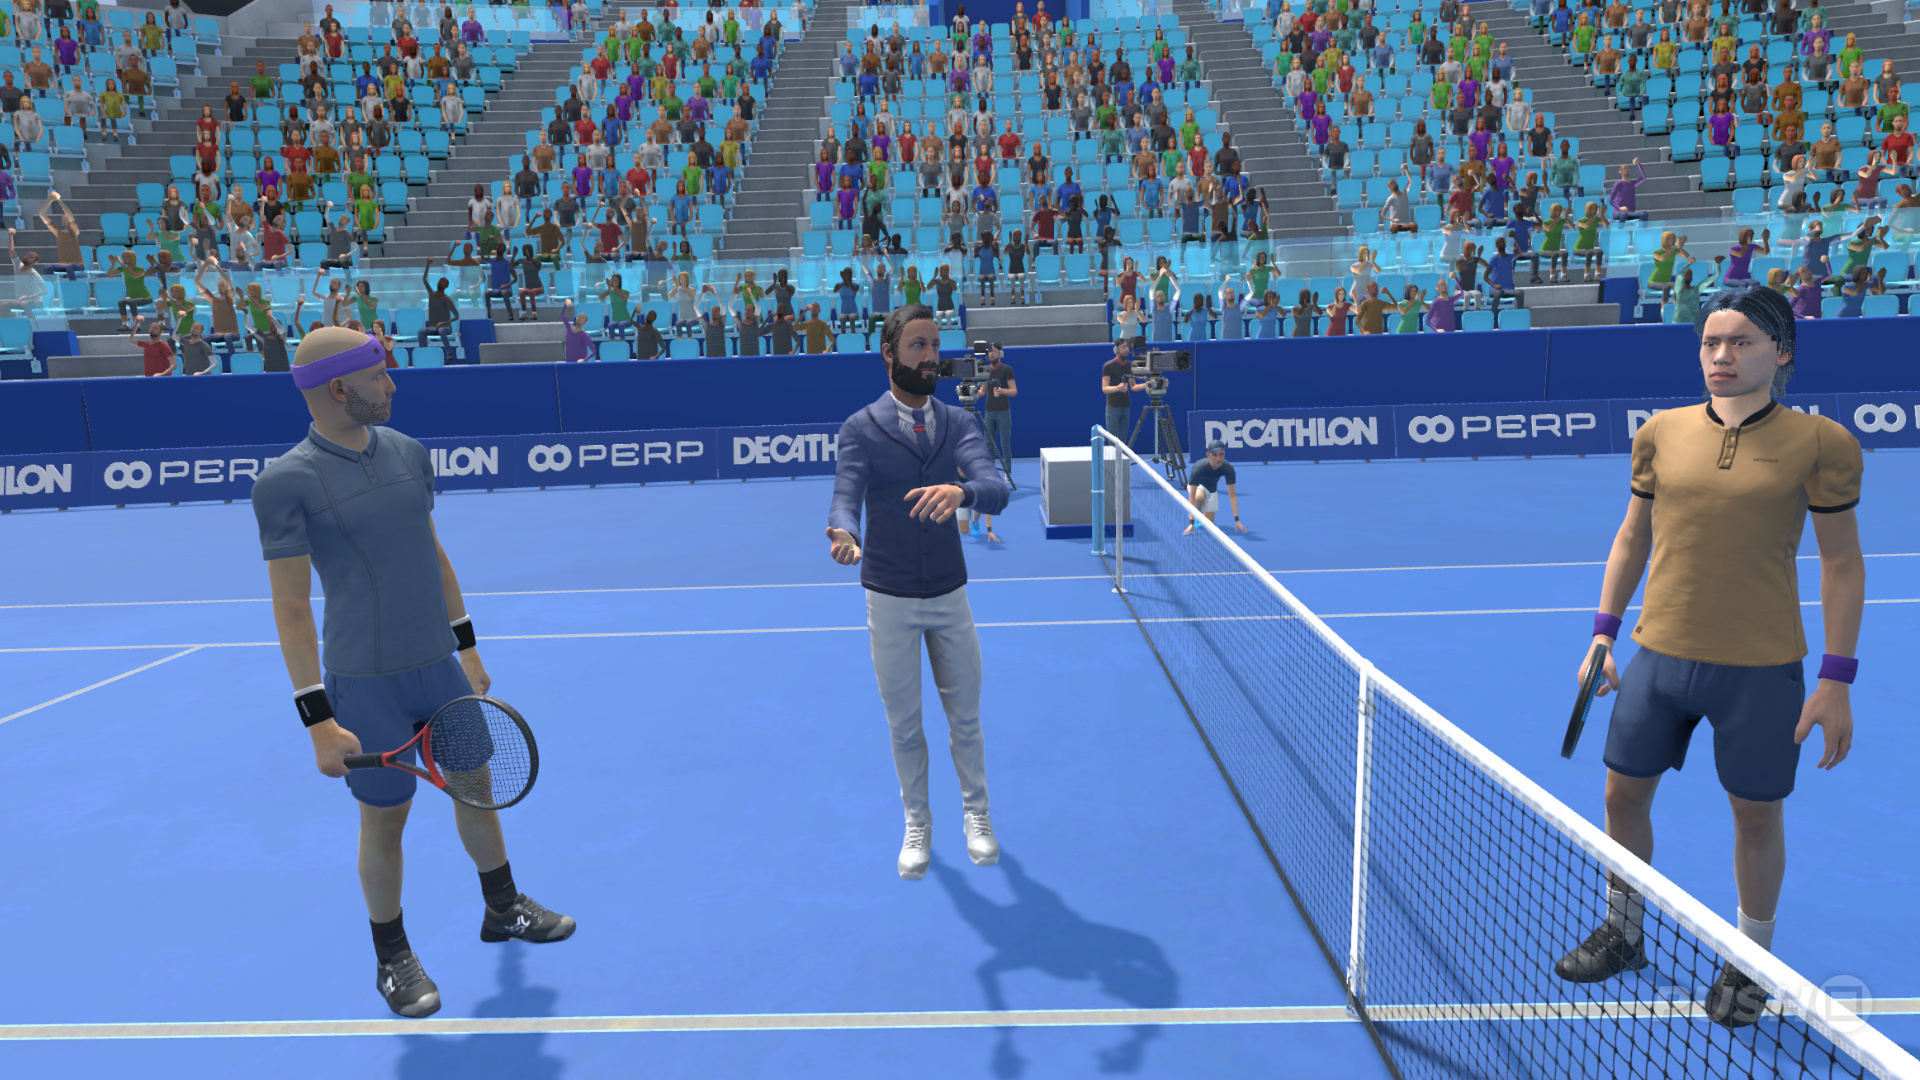  Tennis On-Court - PlayStation 5 : Video Games